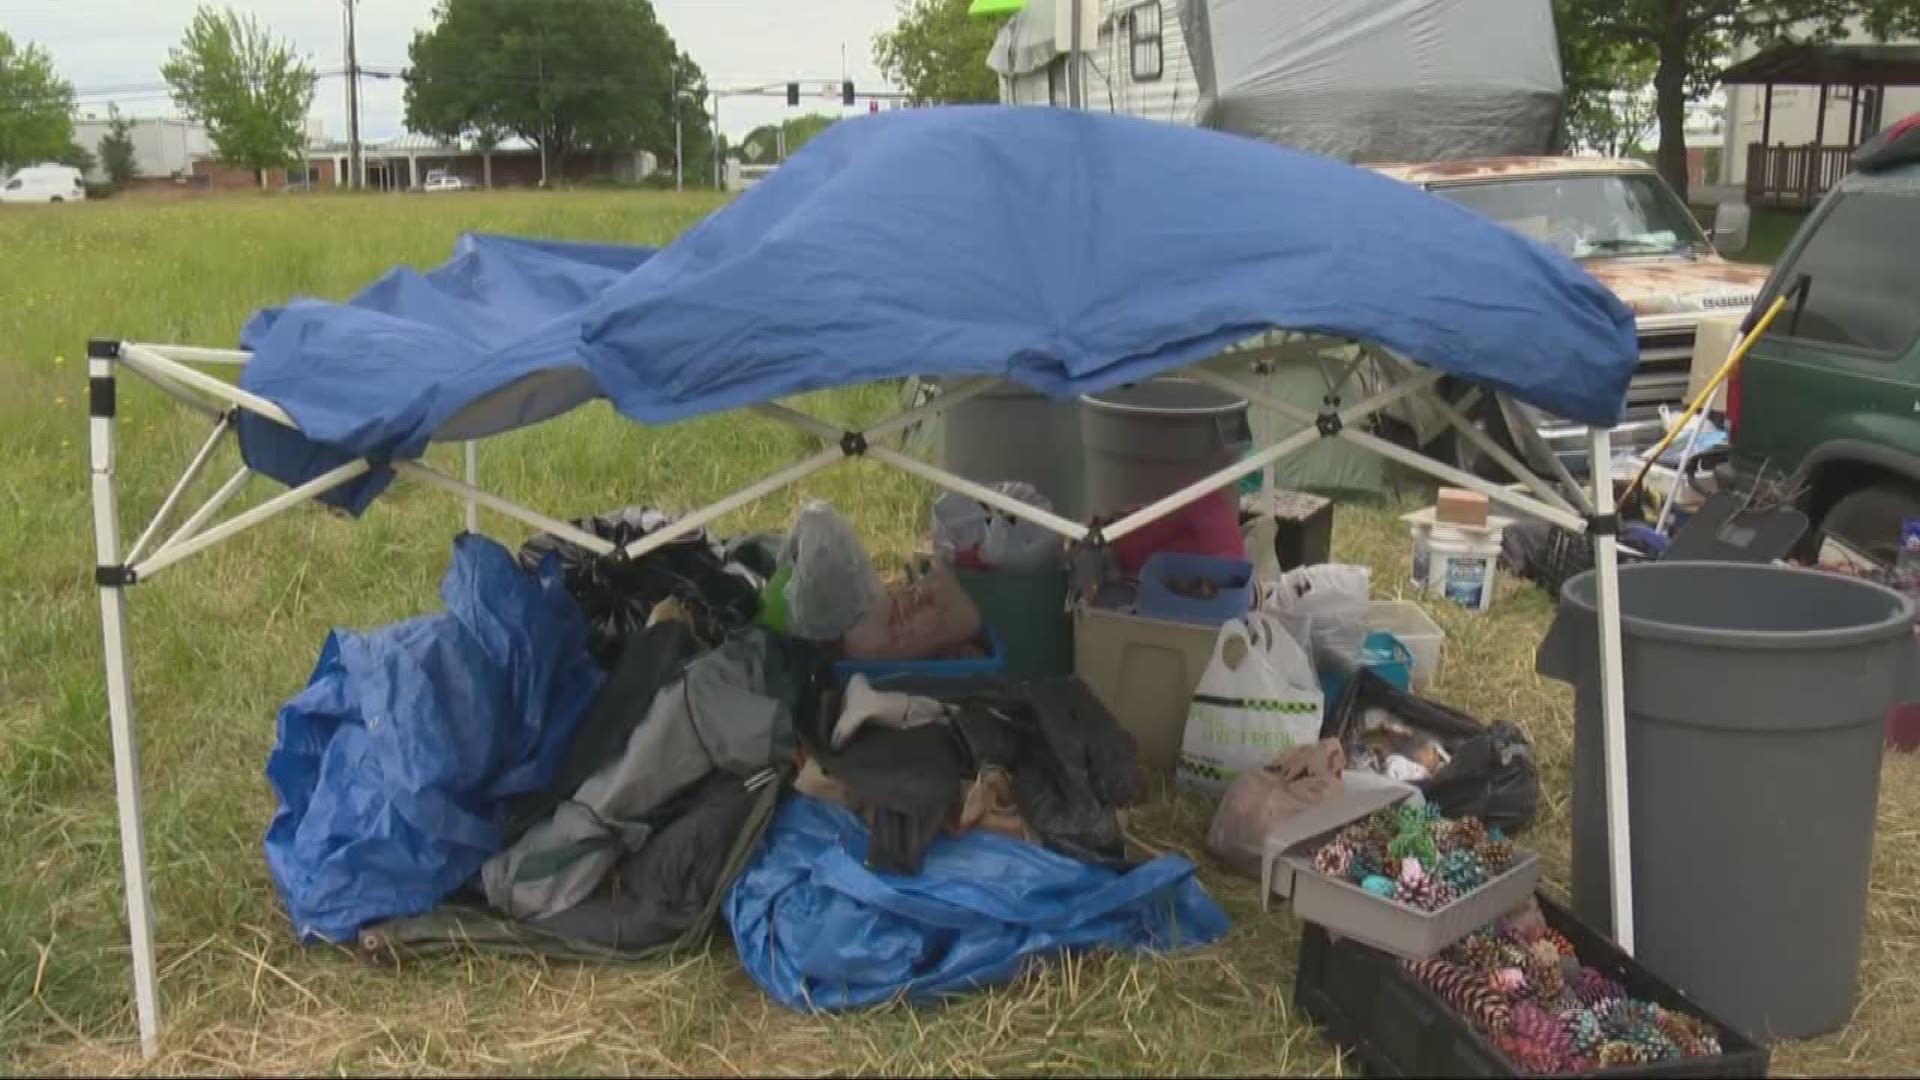 The city of Beaverton has banned camping on streets and sidewalks.